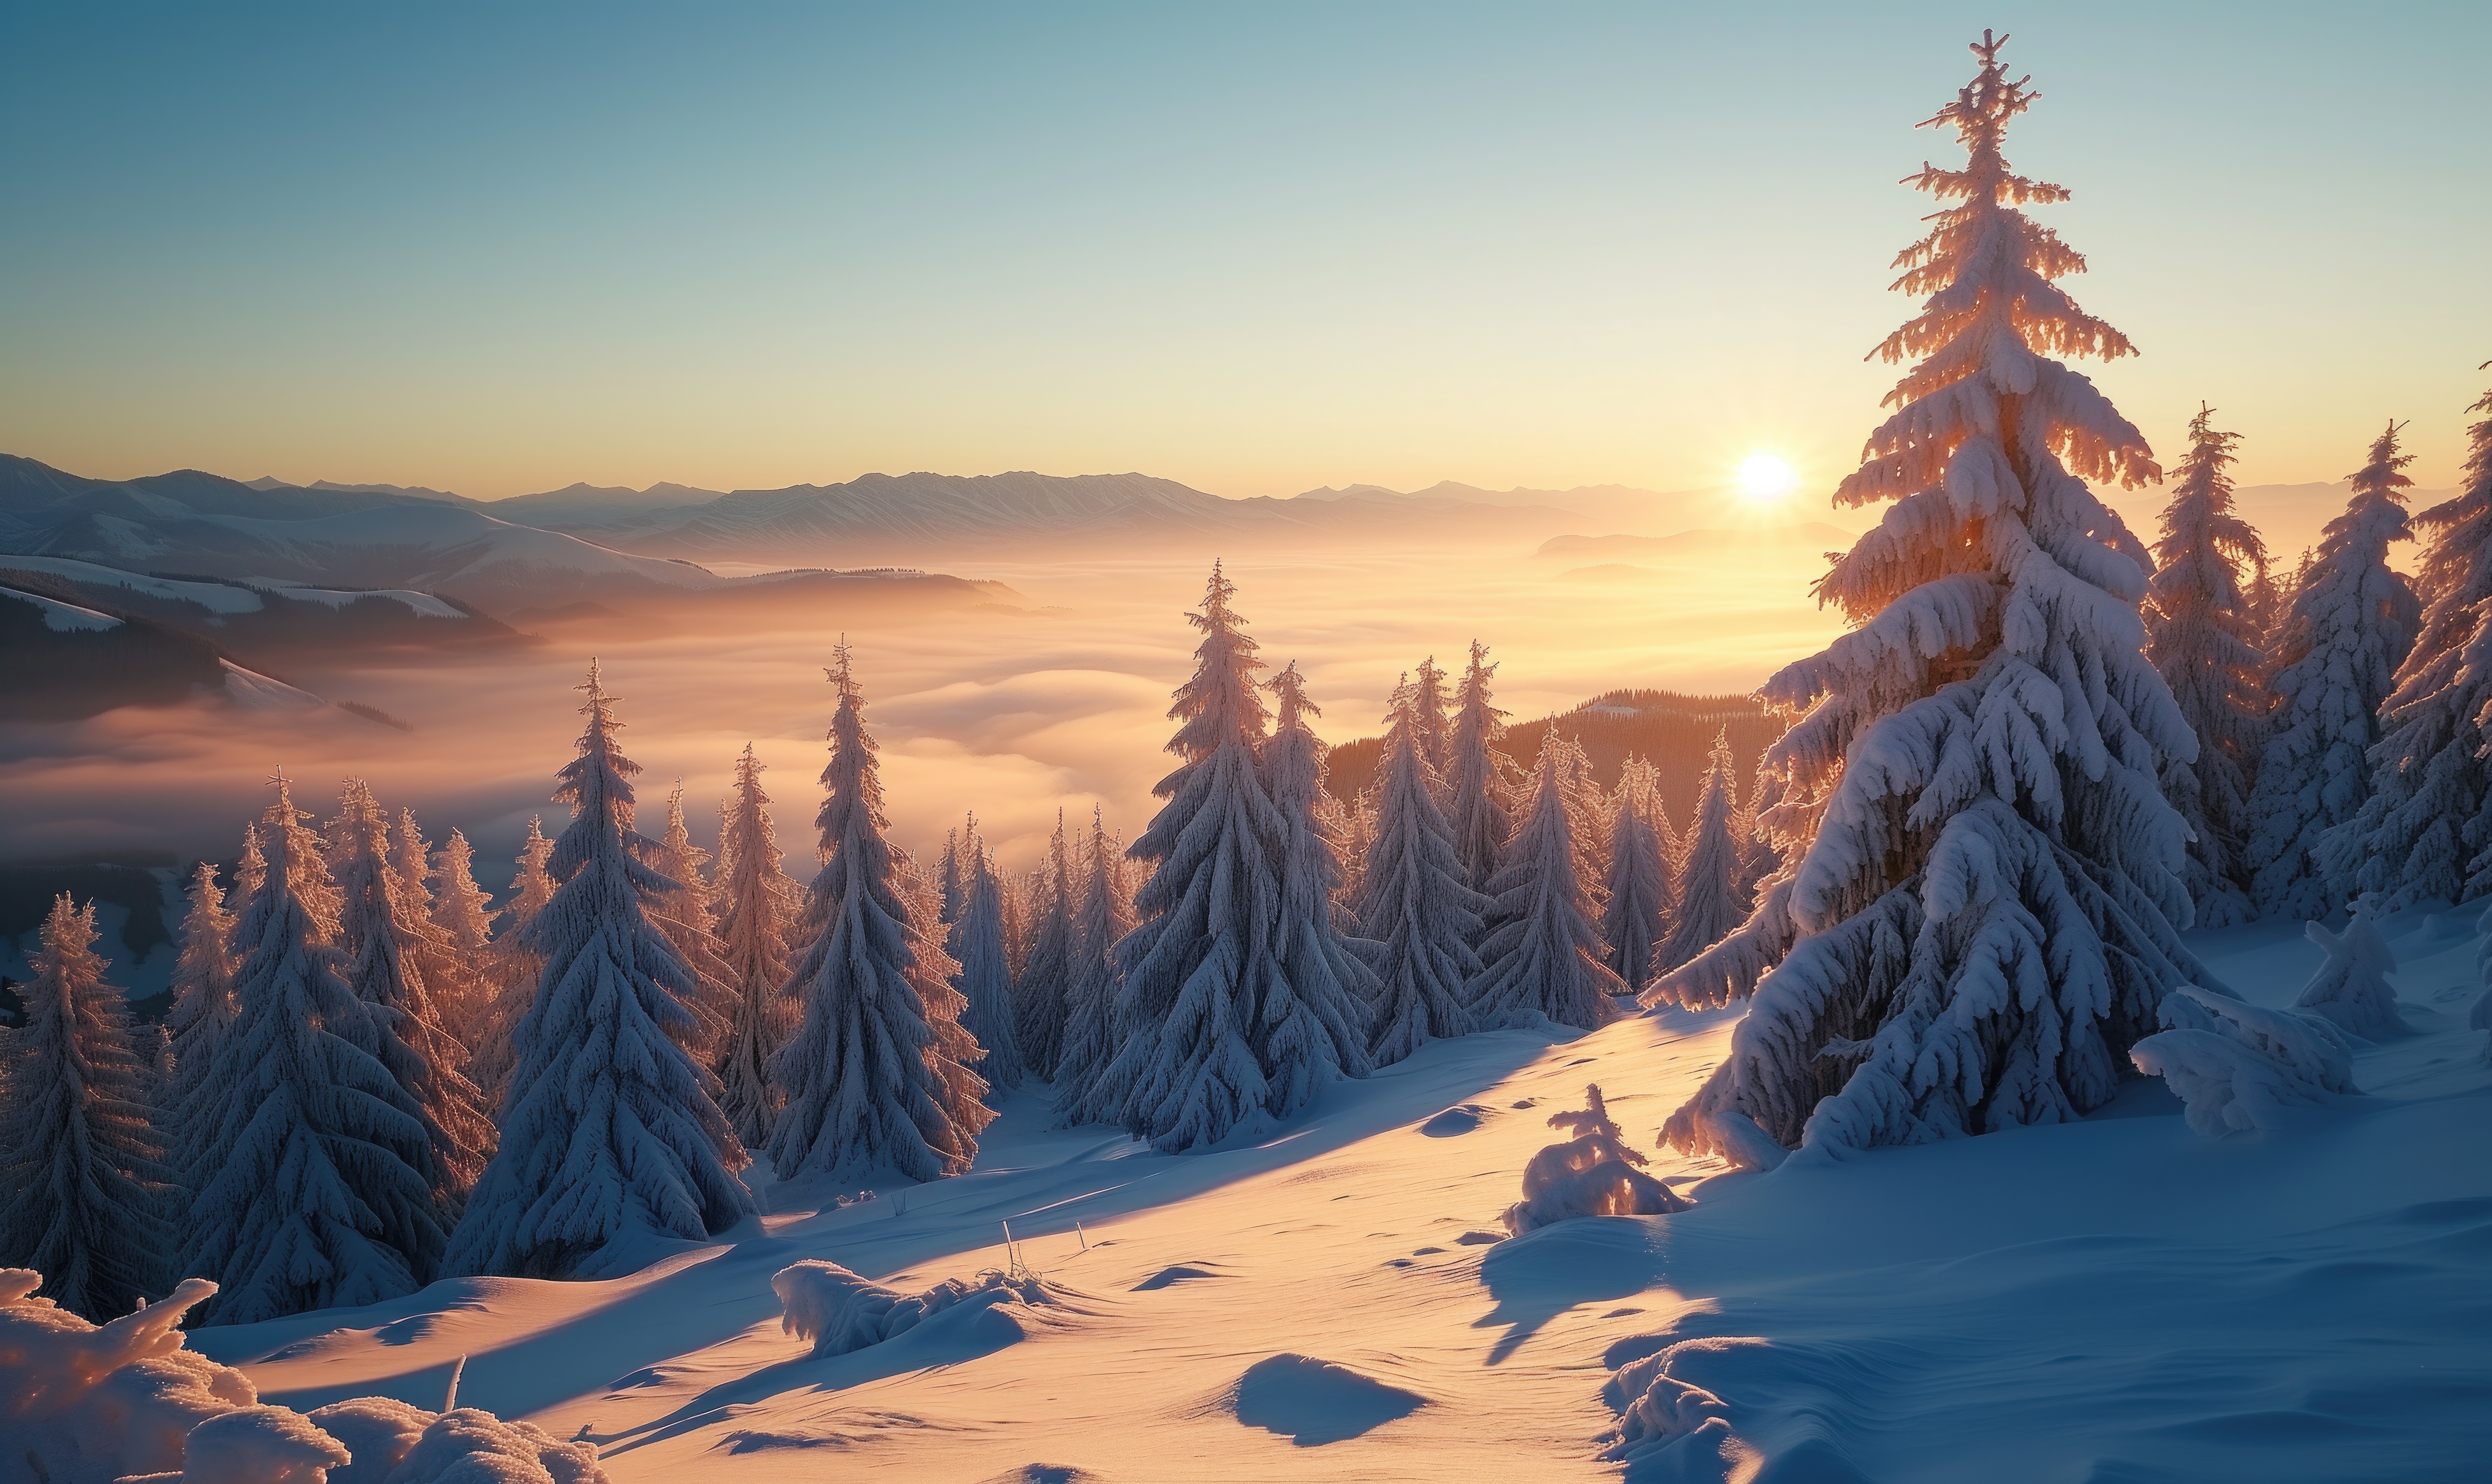 https://picjumbo.com/wp-content/uploads/beautiful-winter-mountain-scenery-sunset-with-snow-covered-trees-and-inversion-free-photo.jpg